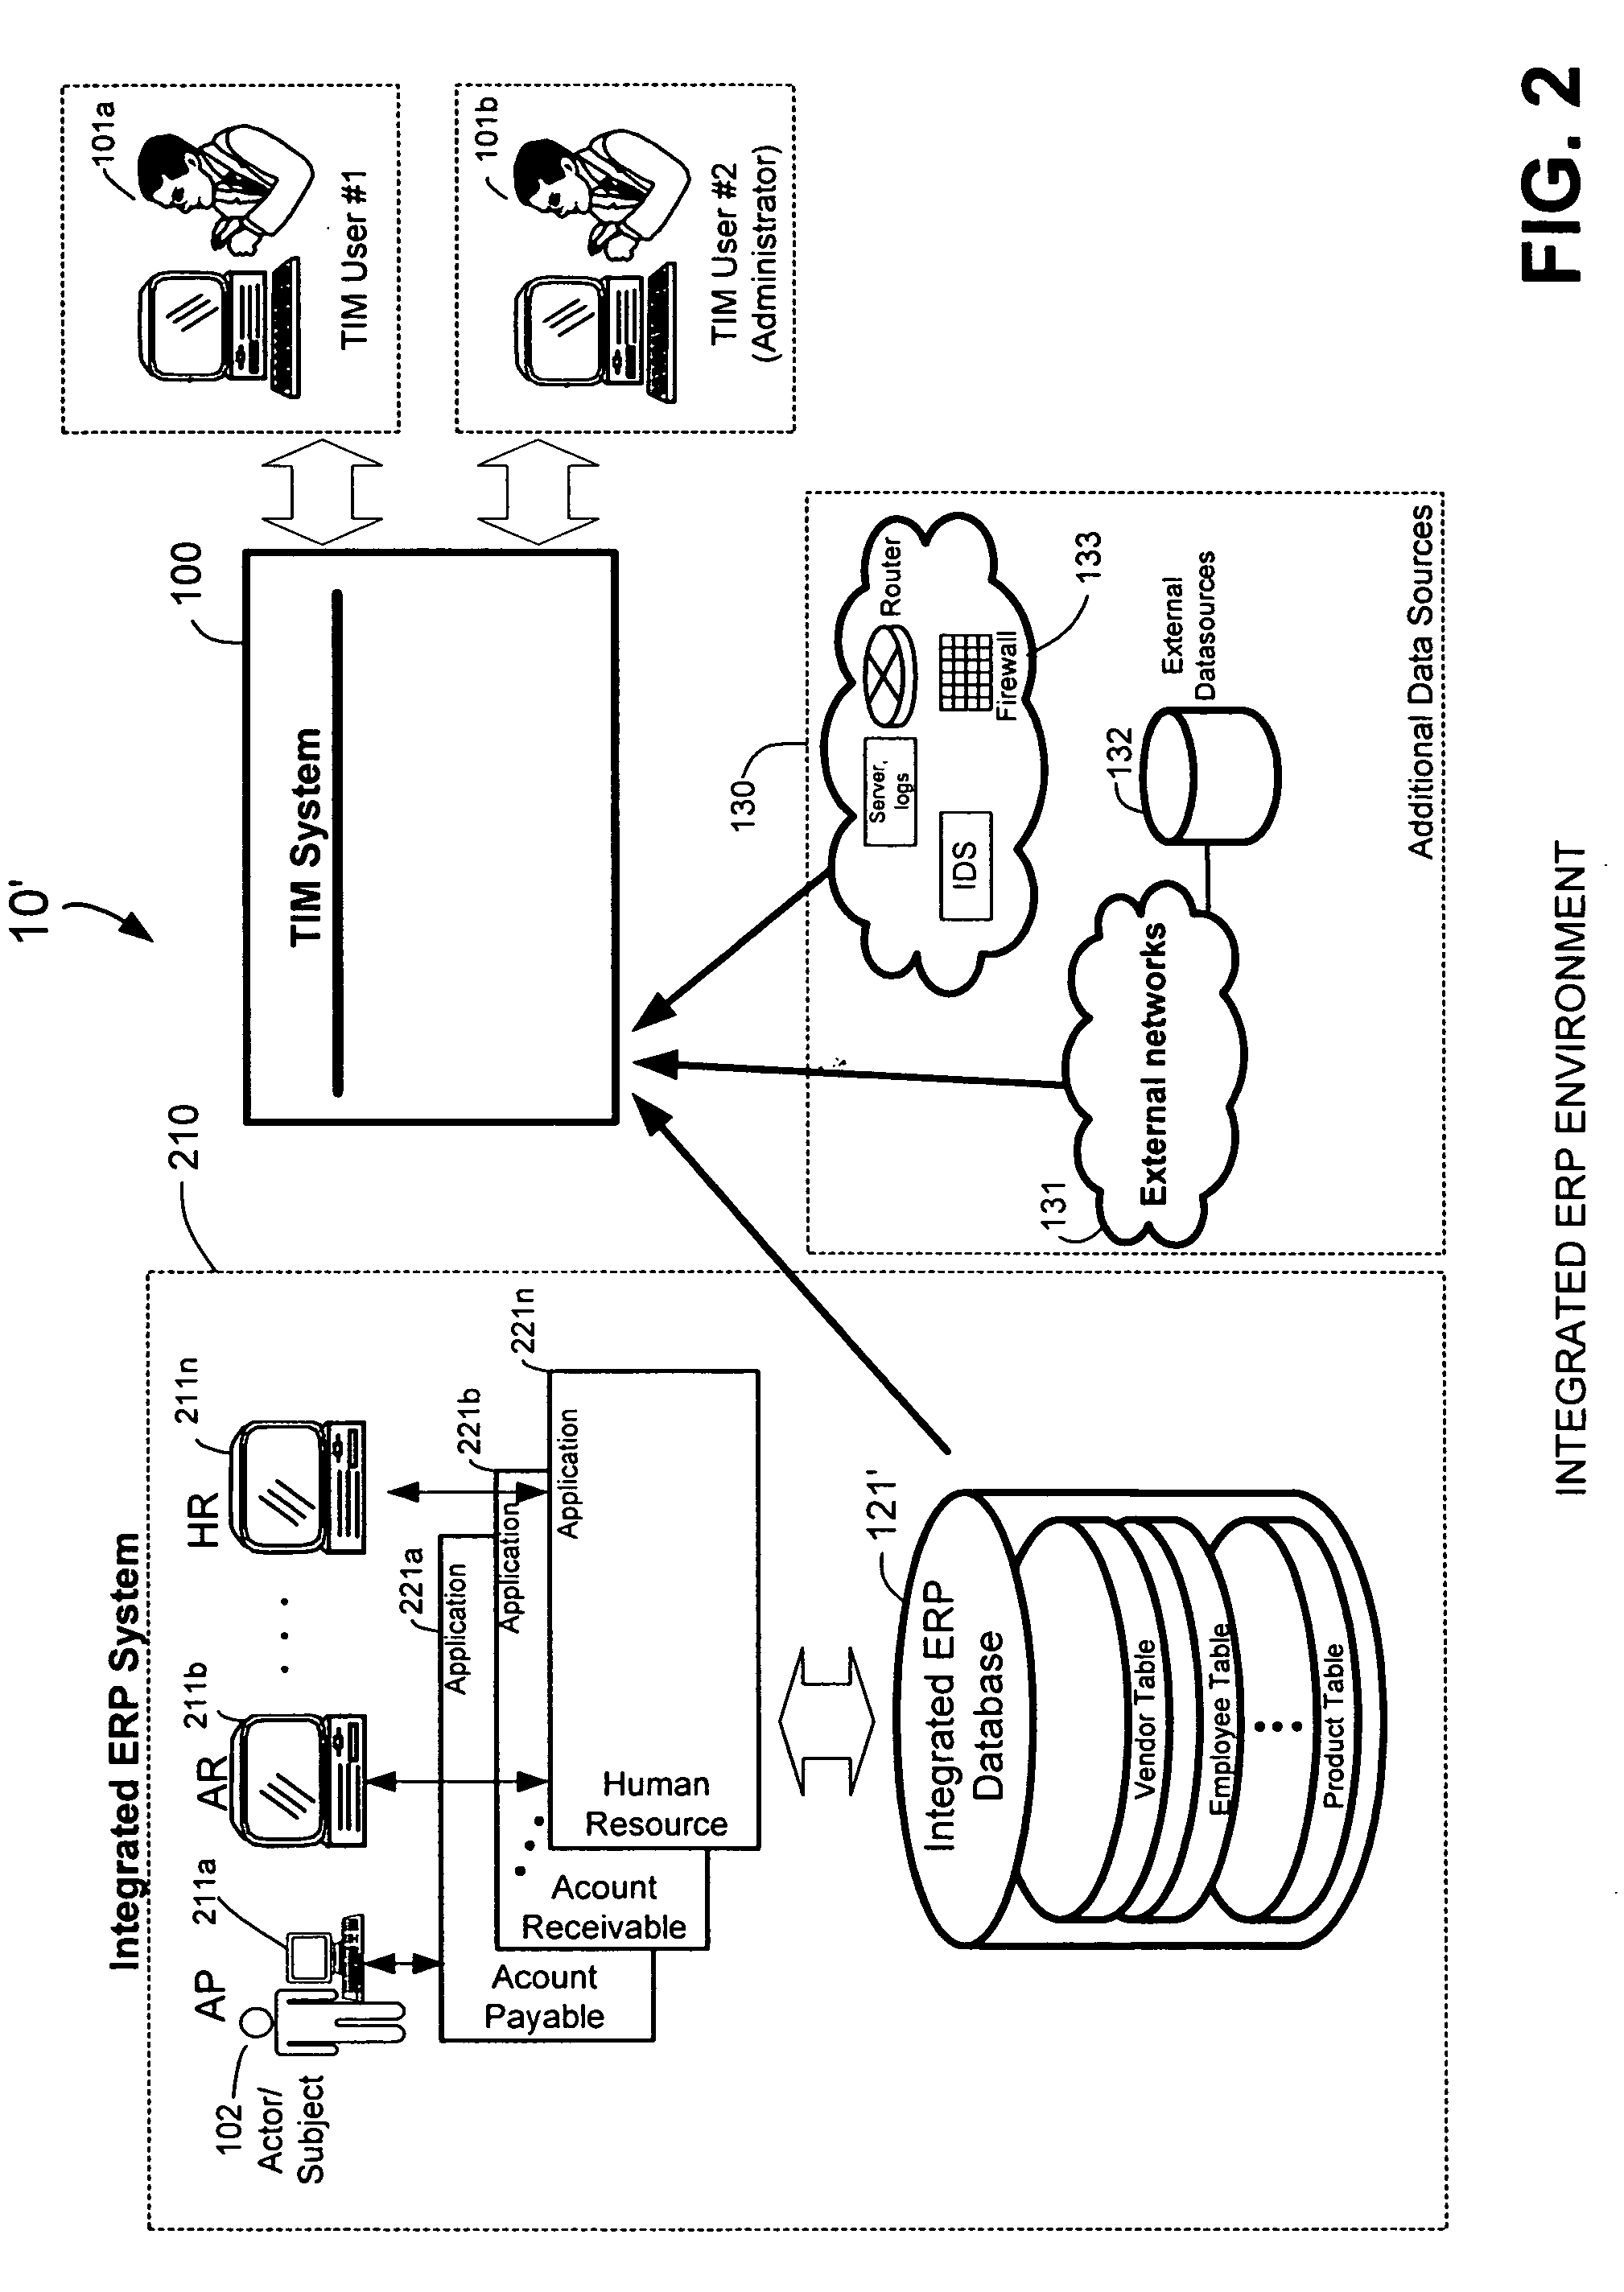 Methods and systems for transaction compliance monitoring